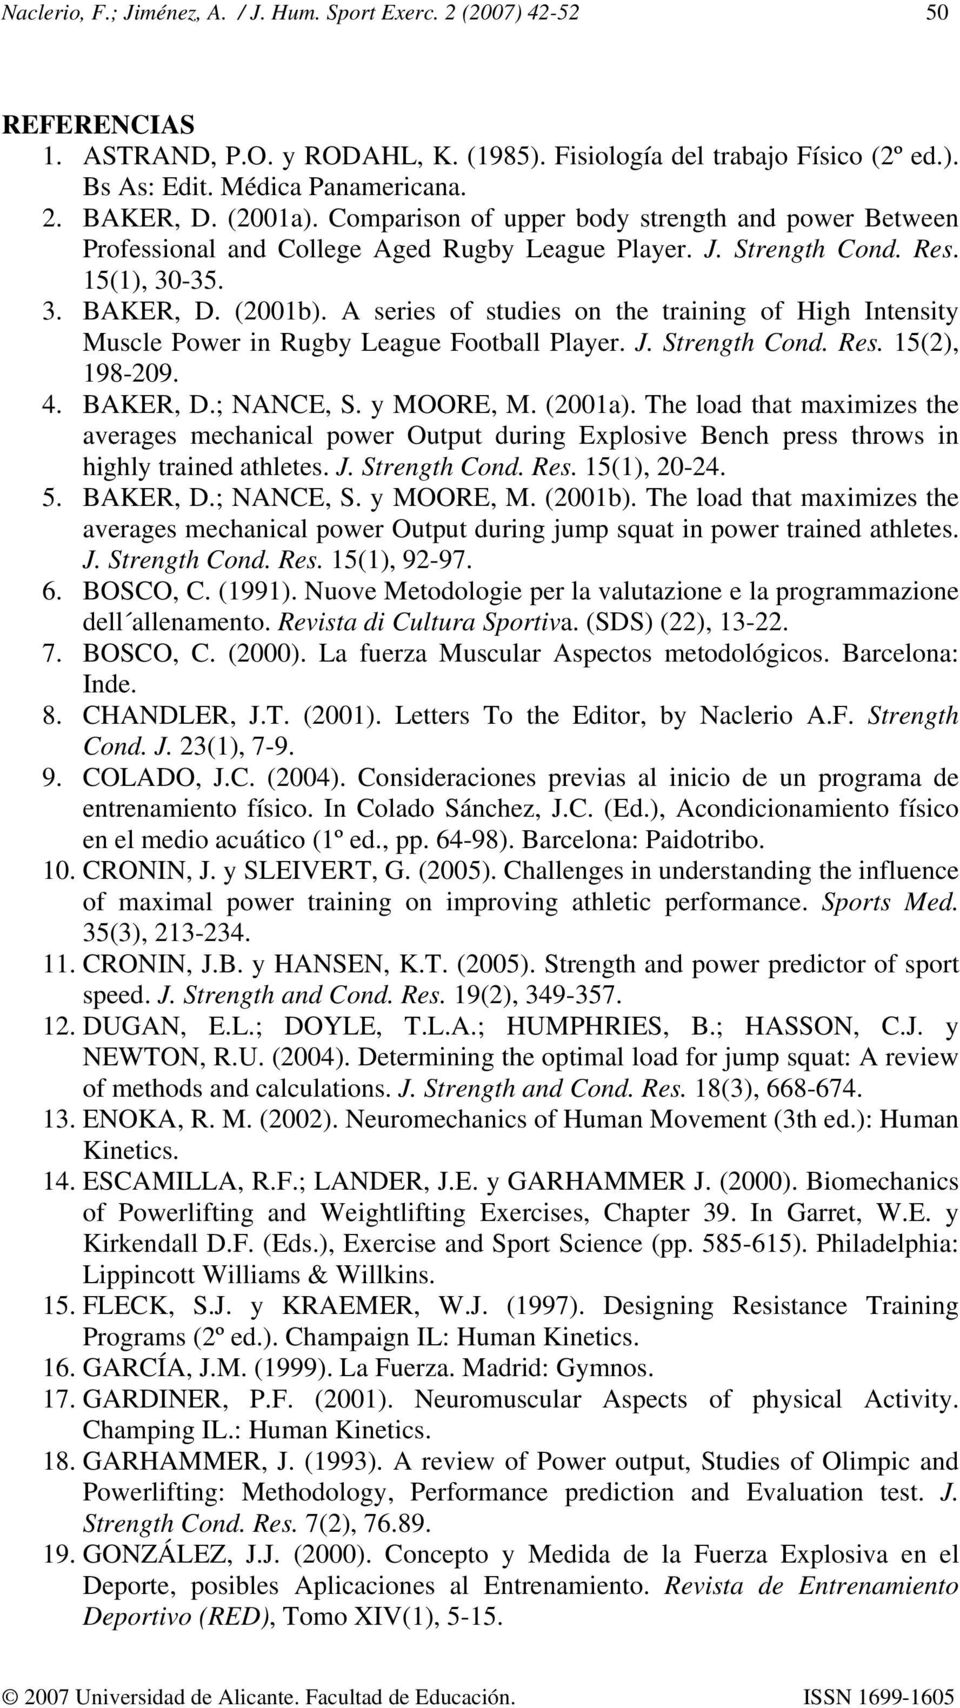 A series of studies on the training of High Intensity Muscle Power in Rugby League Football Player. J. Strength Cond. Res. 15(2), 198-209. 4. BAKER, D.; NANCE, S. y MOORE, M. (2001a).